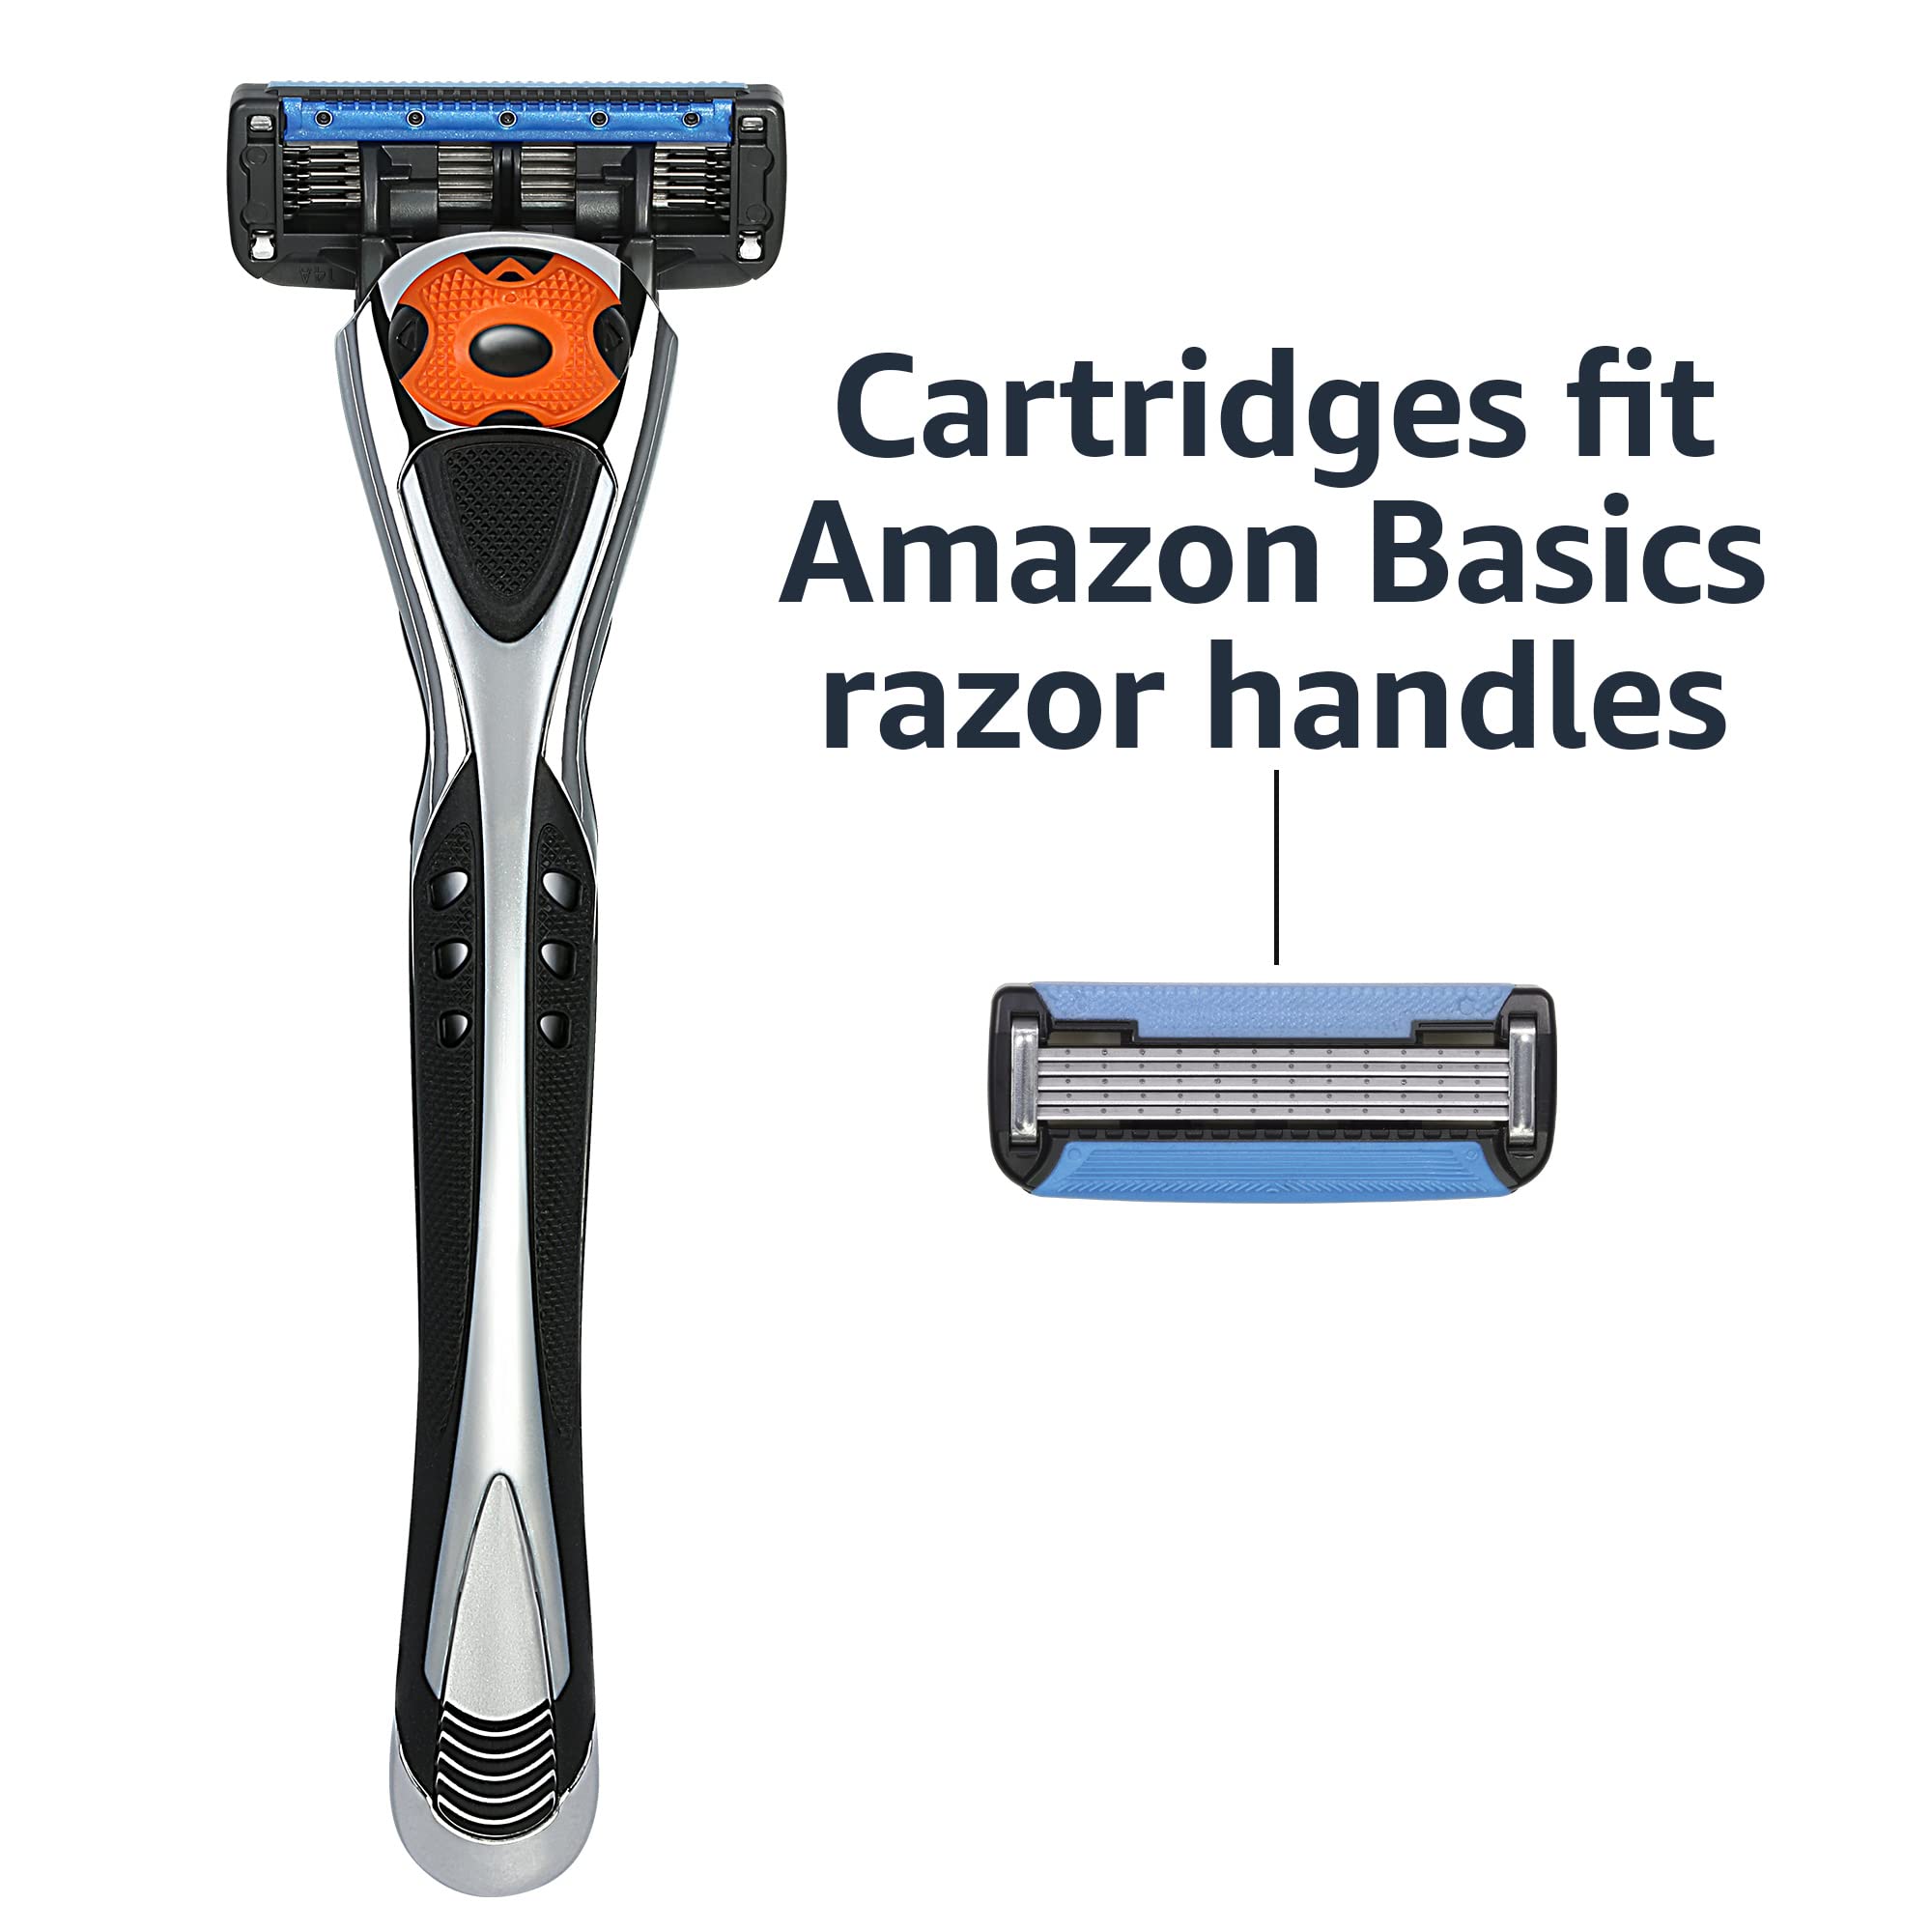 Amazon Basics 5-Blade MotionSphere Razor for Men with Dual Lubrication and Precision Trimmer, Handle & 16 Cartridges, Cartridges fit Amazon Basics Razor Handles only, 17 Piece Set, Black